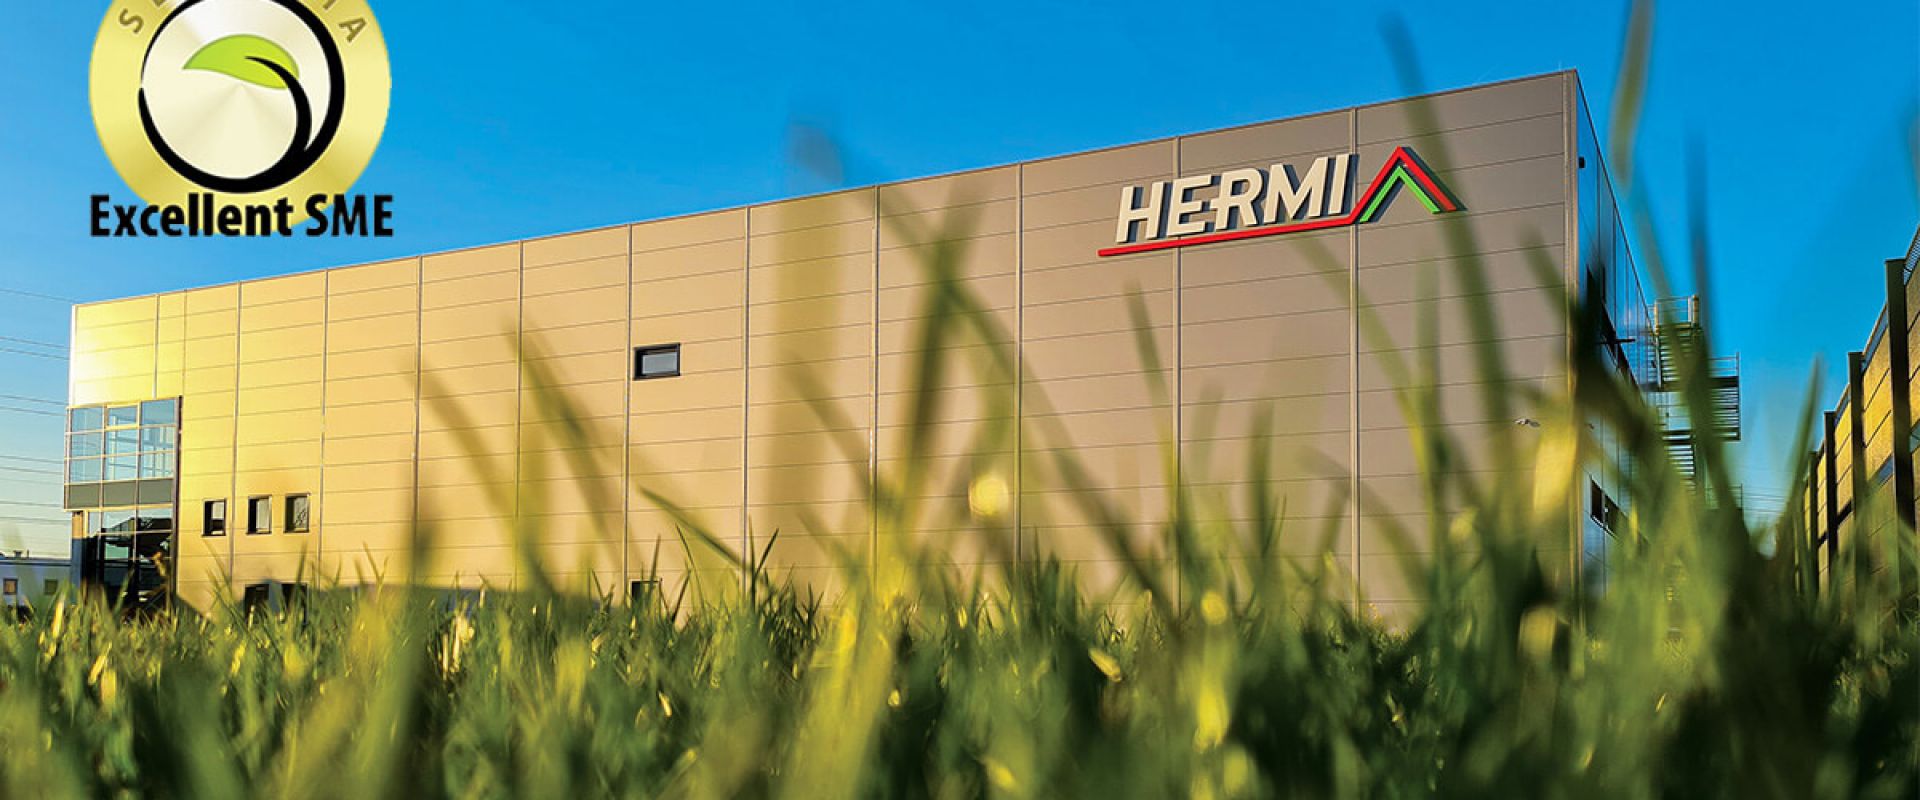 For ten years in a row, Hermi received the Excellent SME Slovenia certificate